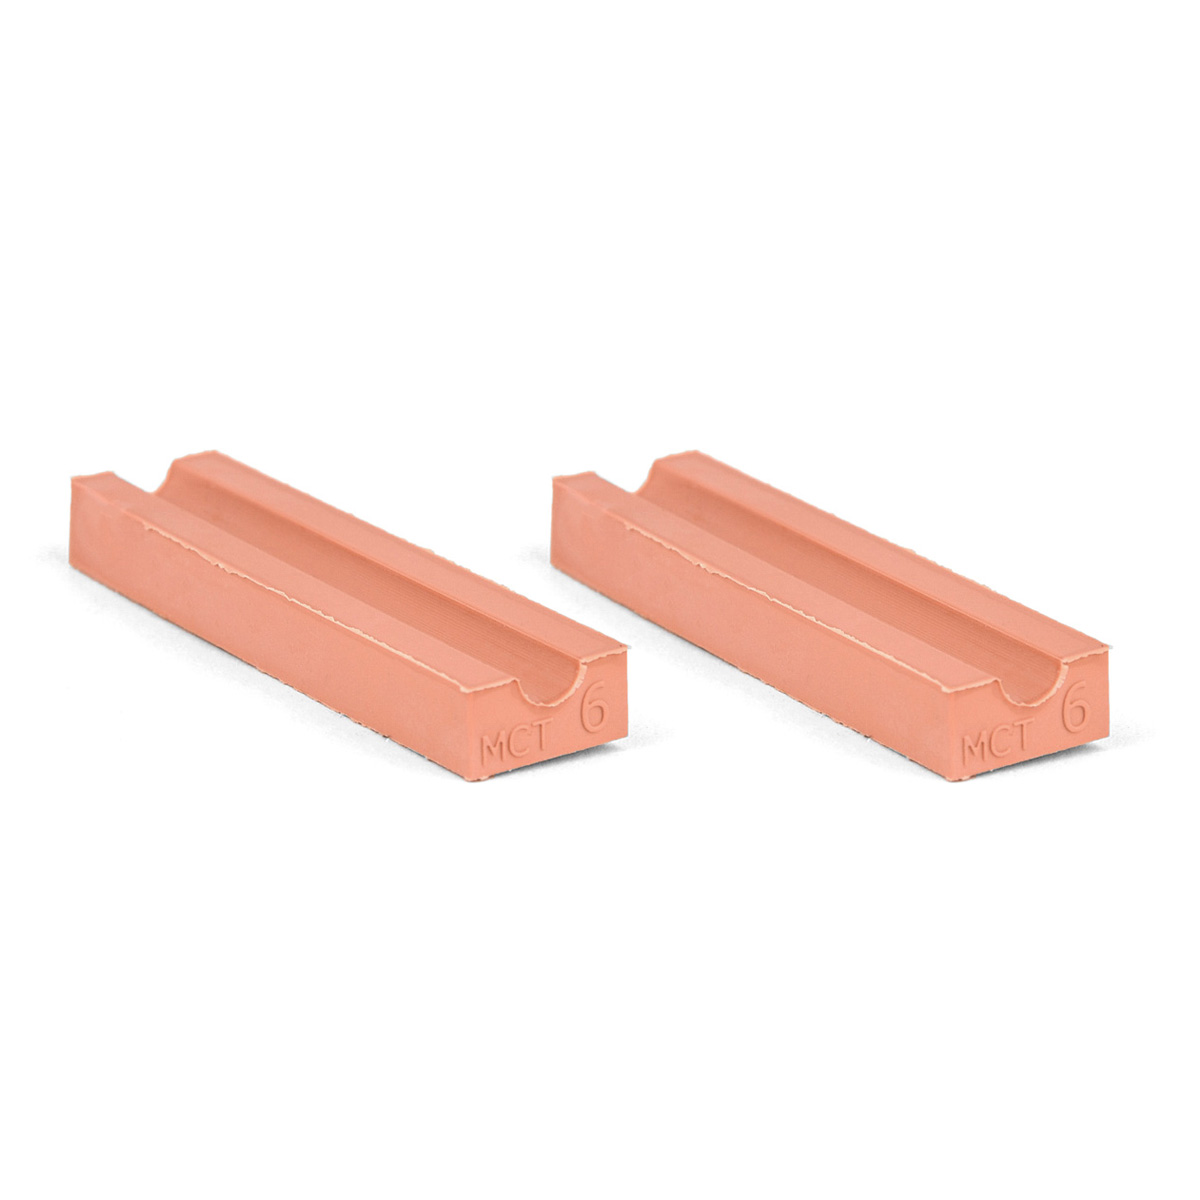 15-06*2 Set of 2 half insert block lycron, 15-06 for cable/pipe diam. 5.5-6.5mm